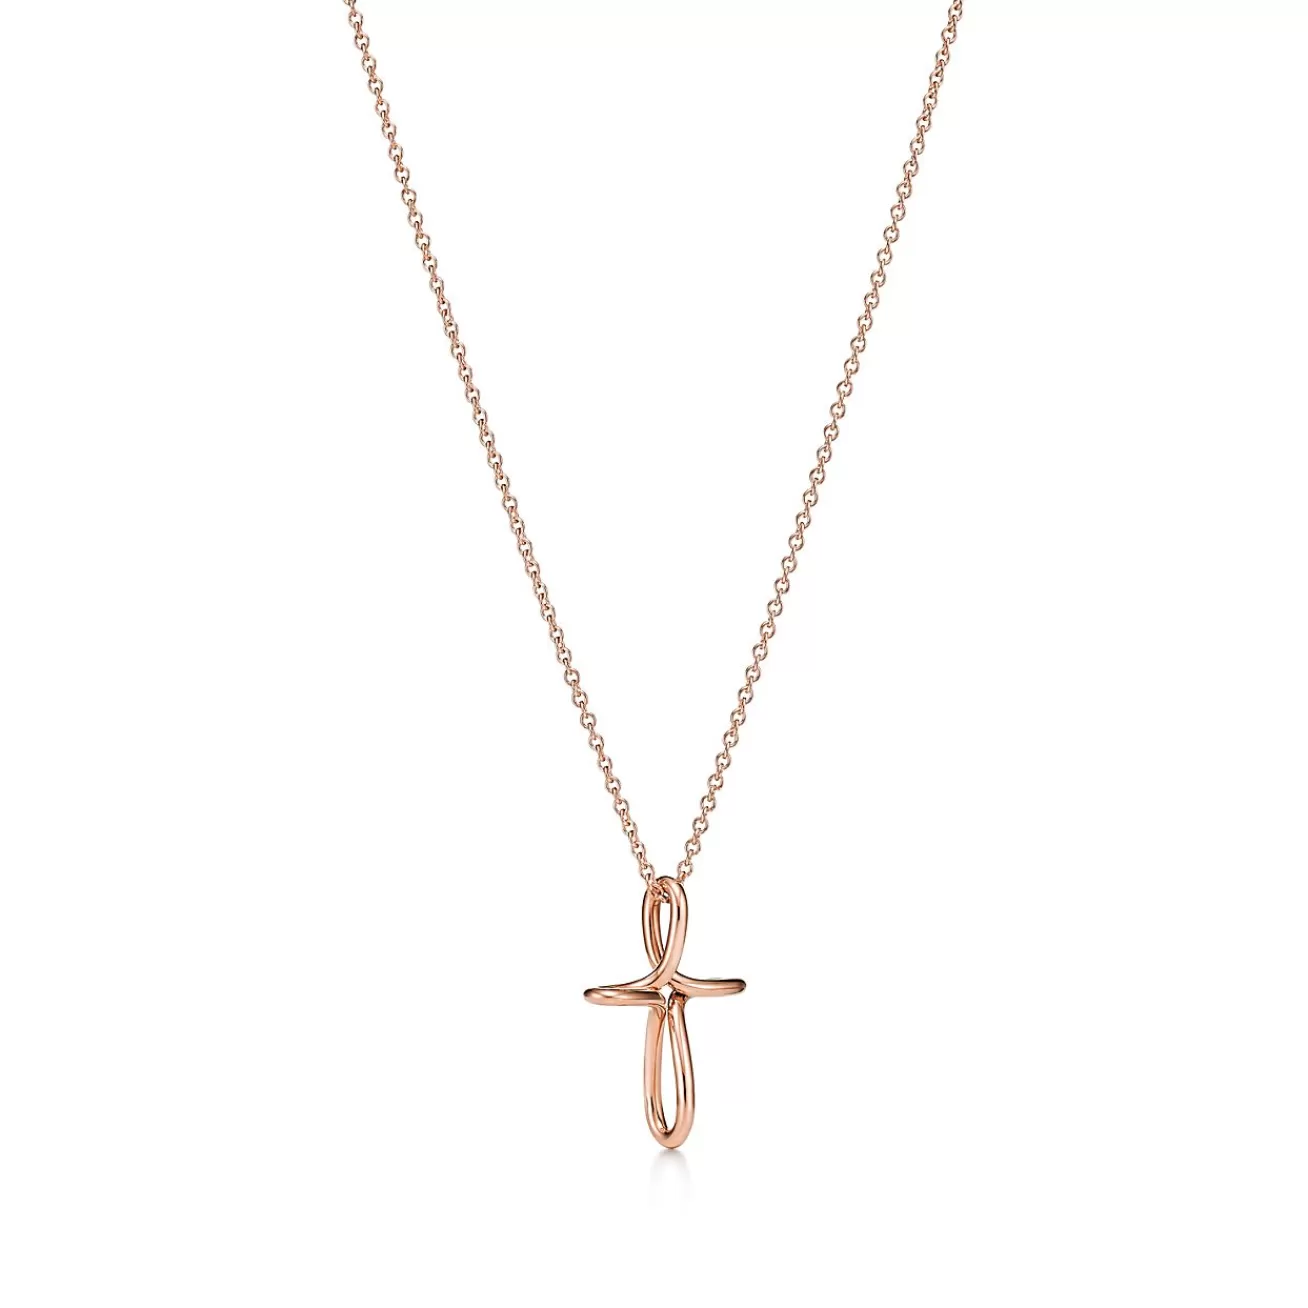 Tiffany & Co. Elsa Peretti® infinity cross pendant in 18k rose gold, small. | ^ Necklaces & Pendants | Rose Gold Jewelry